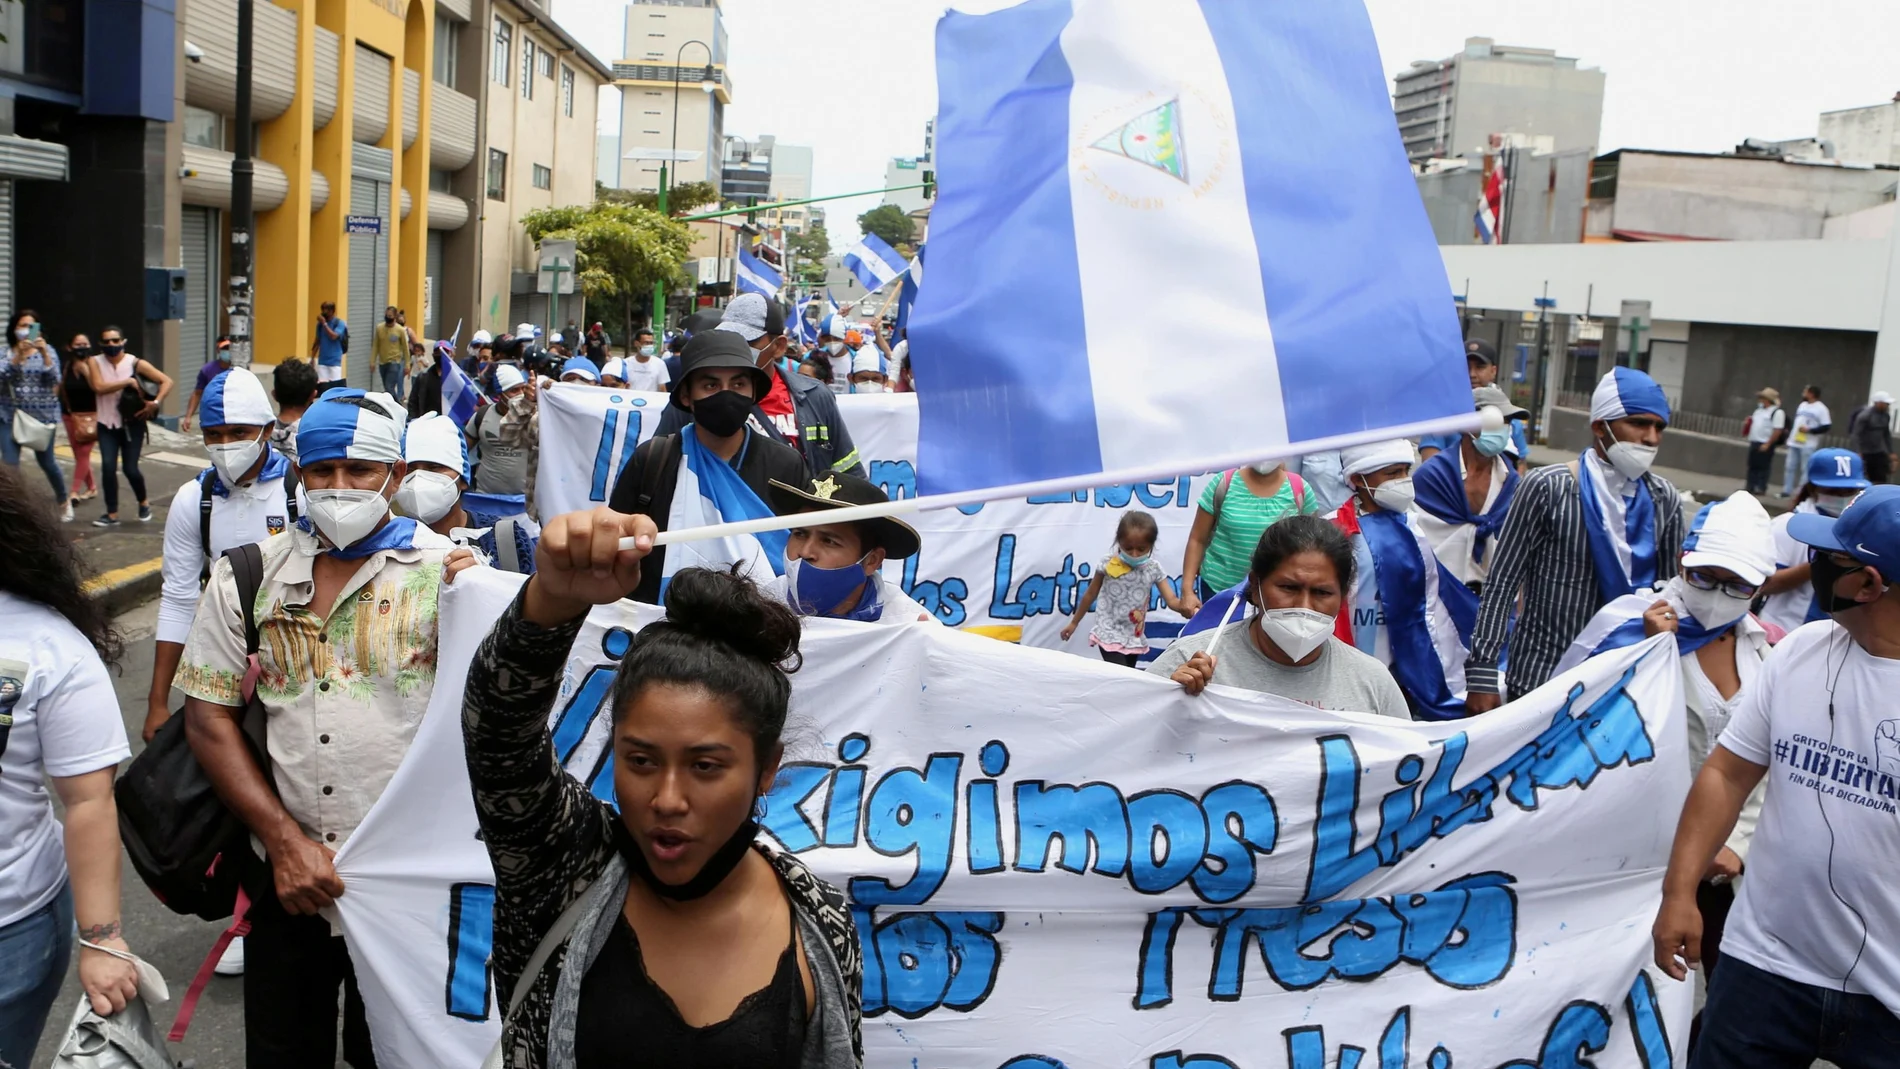 FILE PHOTO: Nicaraguans exiled in Costa Rica take part in a march named "Nicaragua no estas sola" (Nicaragua you're not alone), against the Government of Nicaraguan President Daniel Ortega and the upcoming November 7 general elections, in San Jose, Costa Rica July 18, 2021. REUTERS/Mayela Lopez NO RESALES. NO ARCHIVES/File Photo